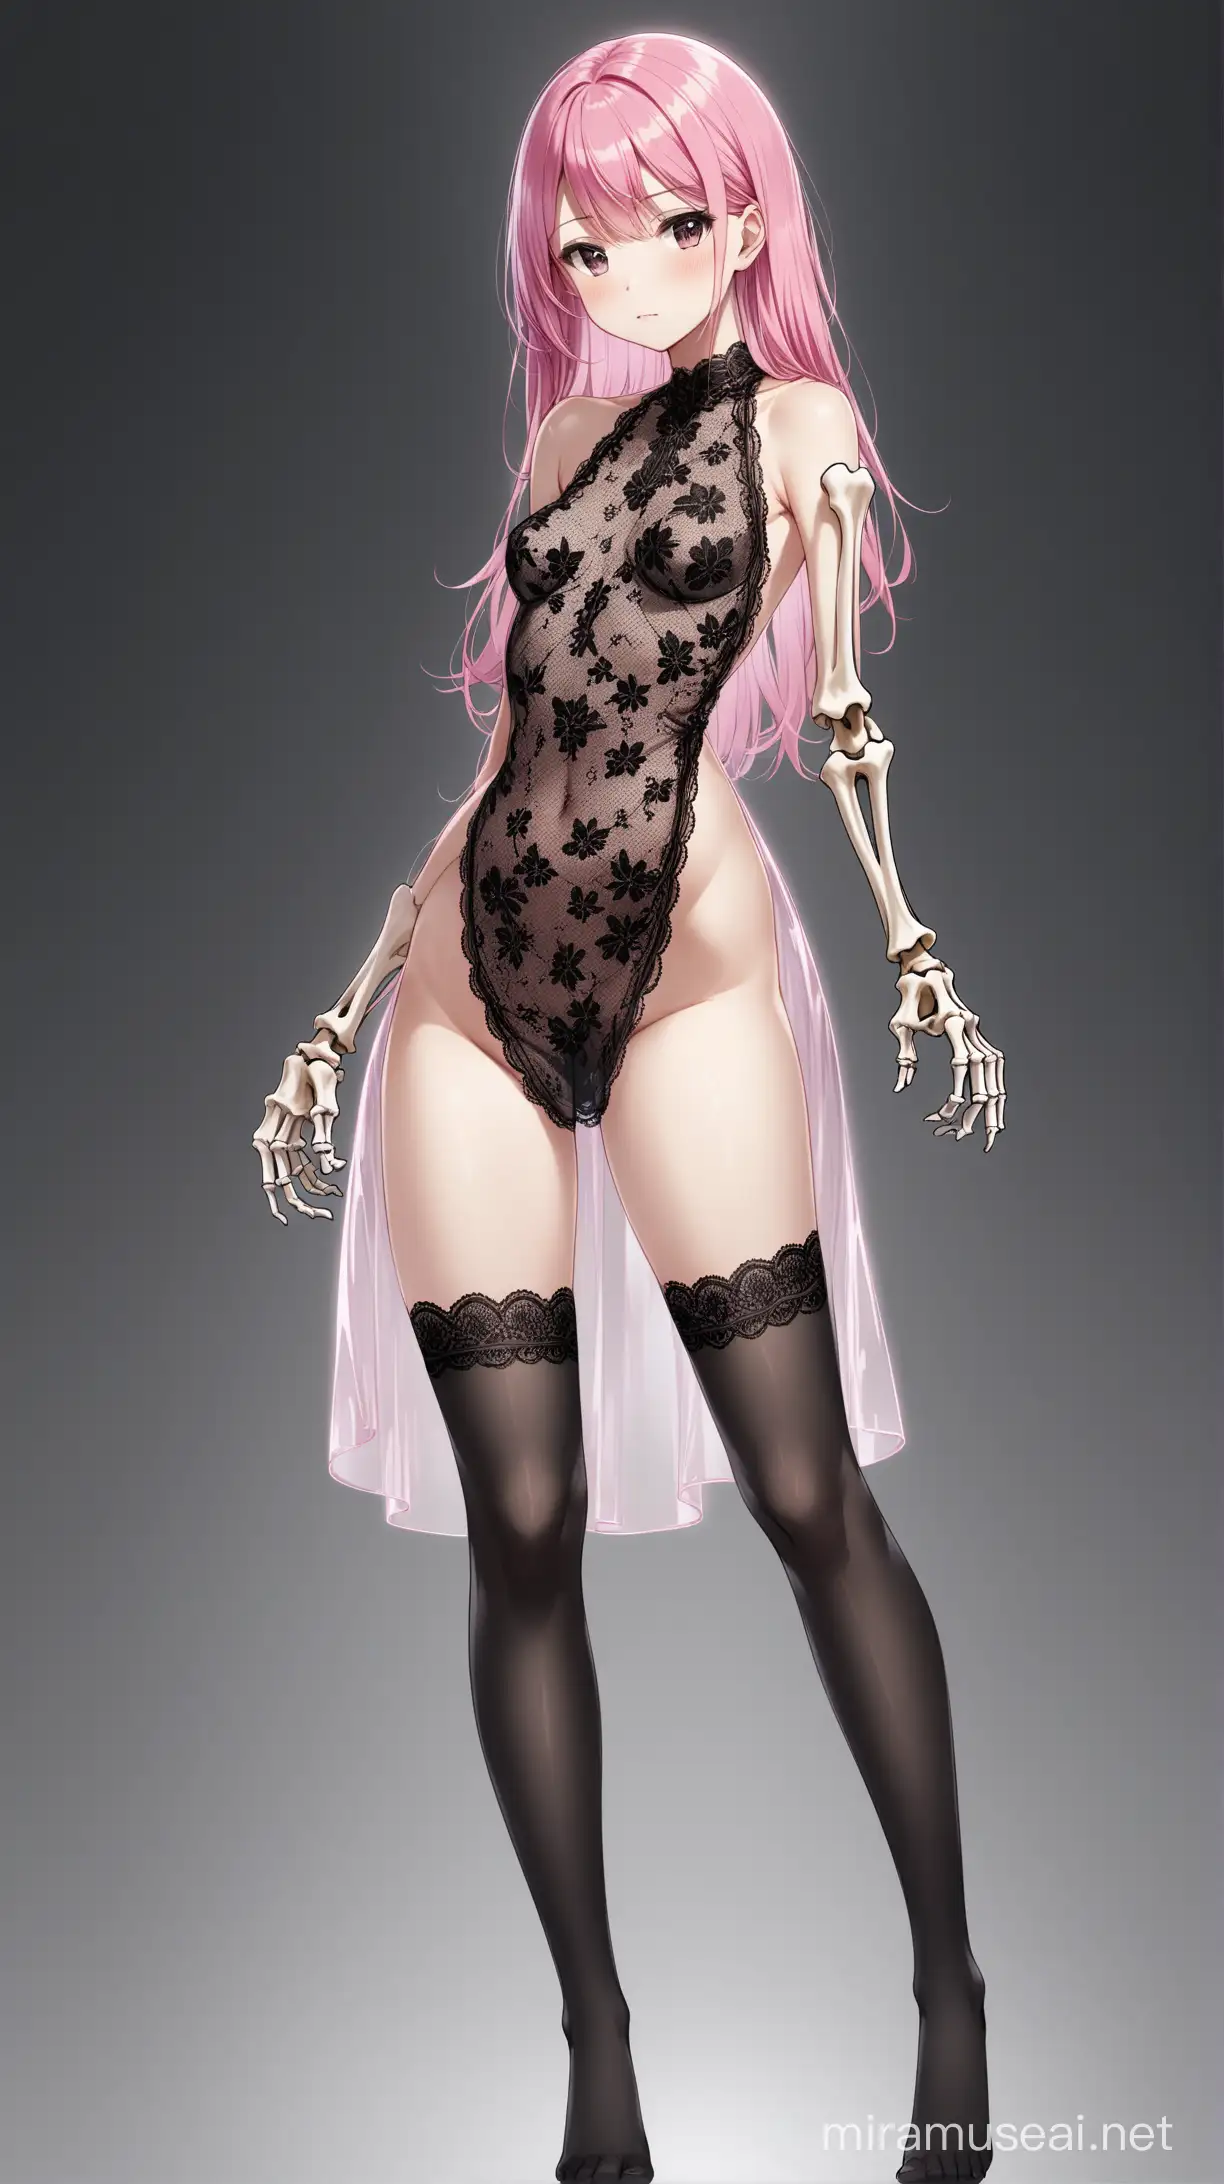 Transparent Dress Girl with Pink Hair and Bone Hand Standing on Dark Gray Background